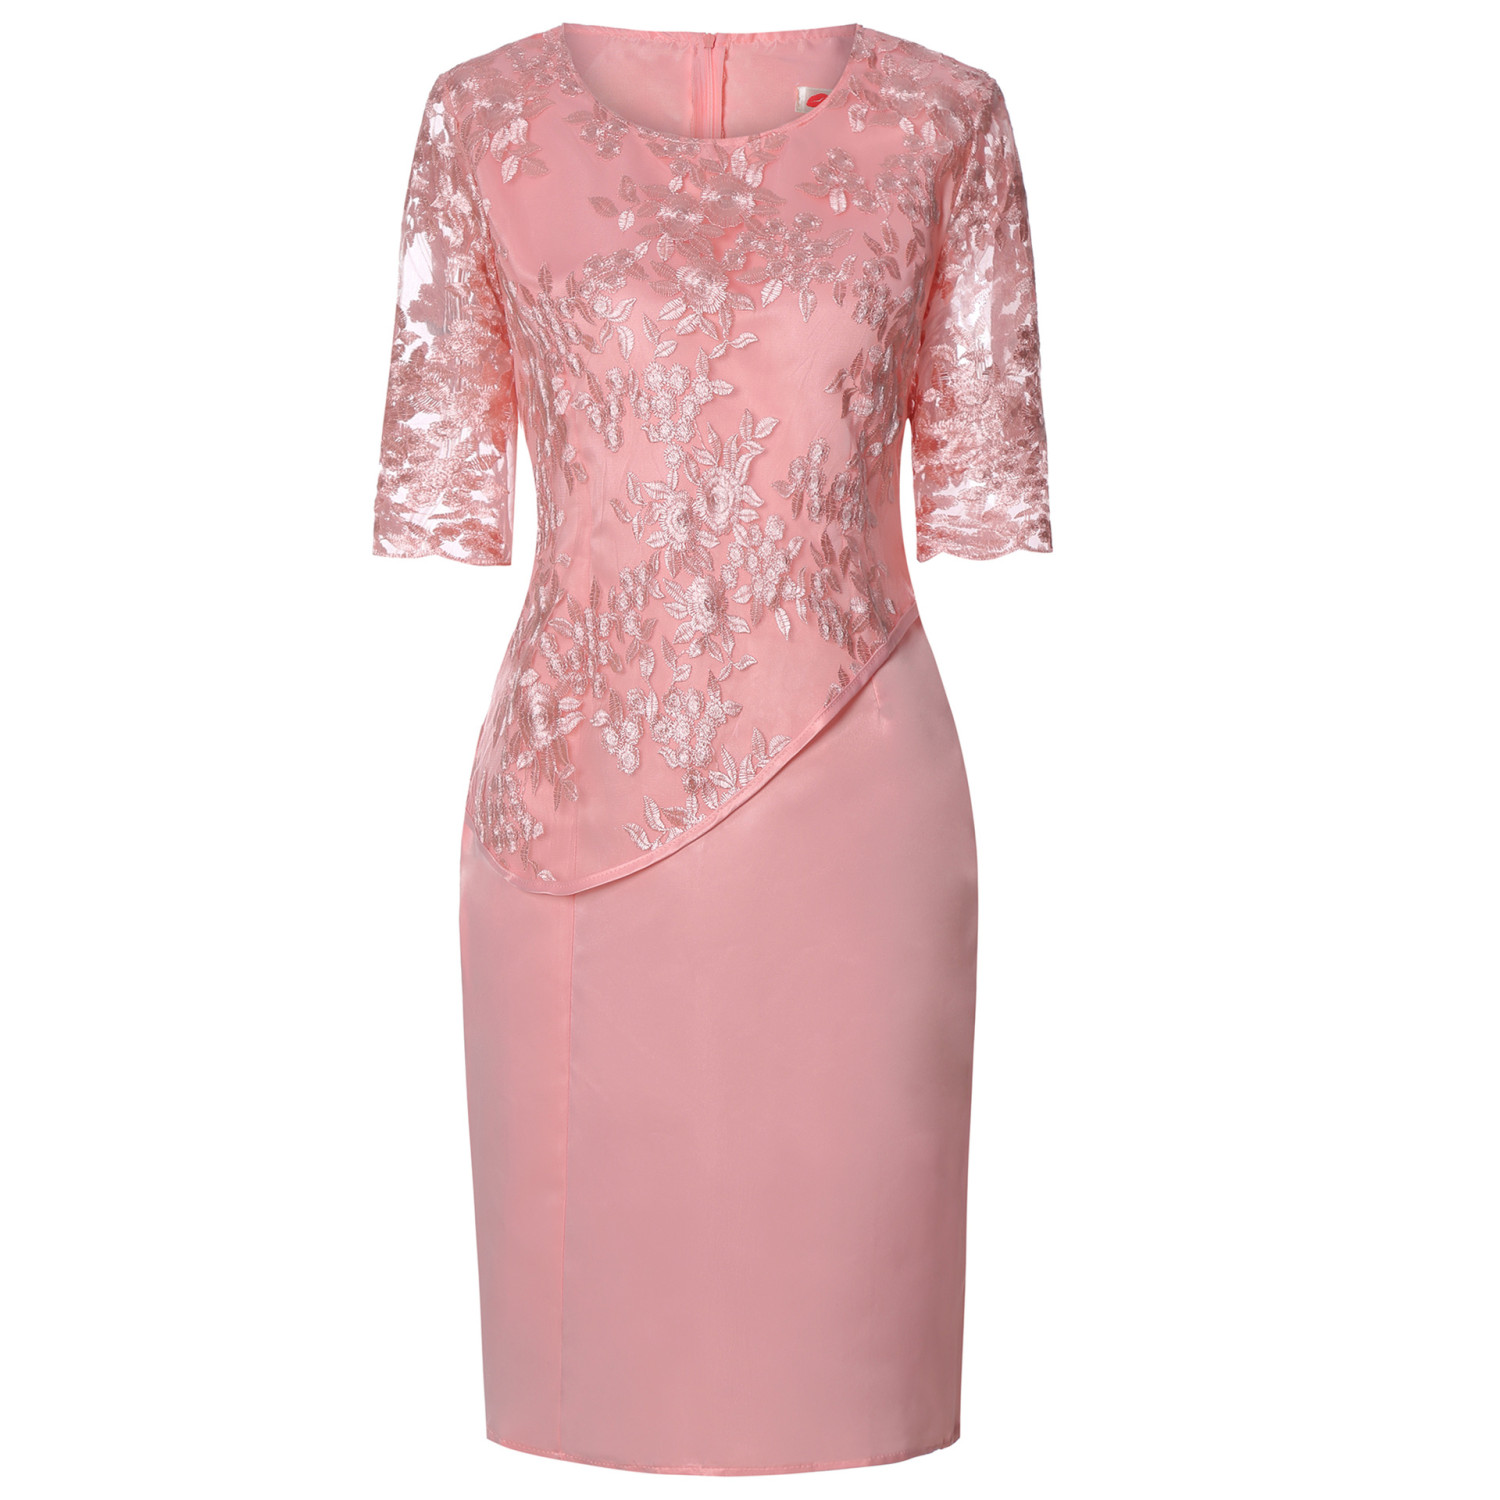 US$ 32.89 - Plus Size Women's Dress Embroidered Floral Lace Cocktail ...